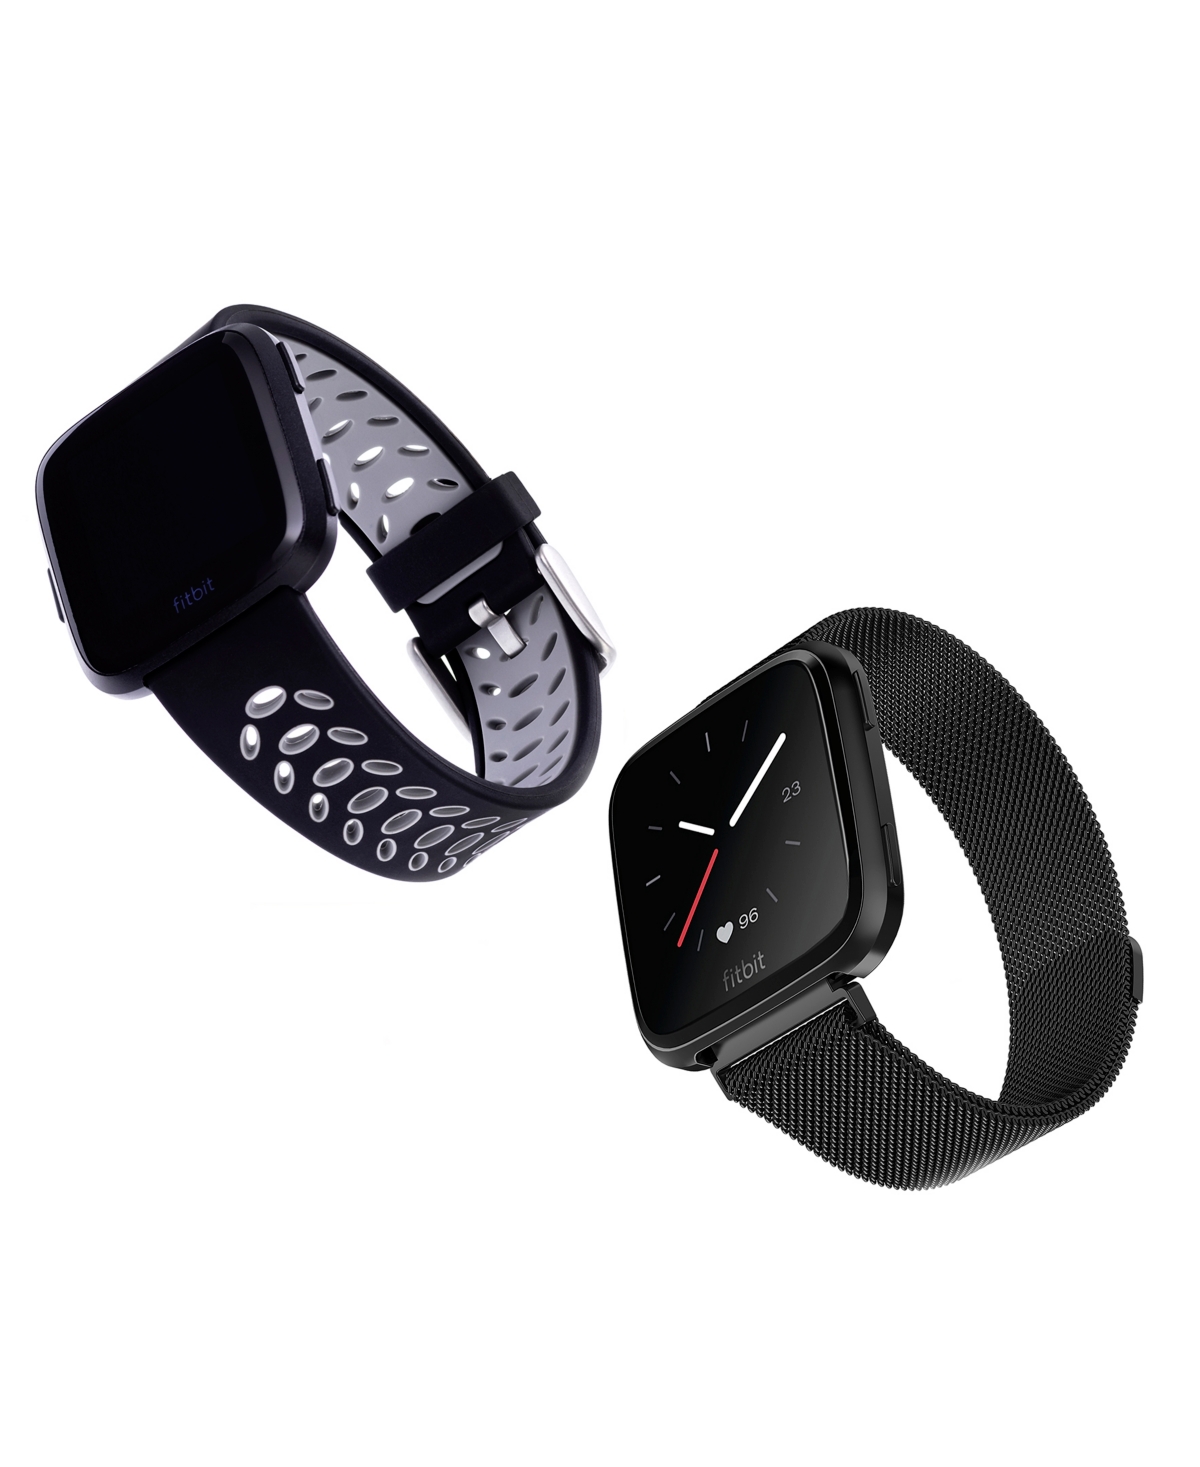 Black Stainless Steel Mesh Band, Black and Gray Premium Sport Silicone Band Set, 2 Piece Compatible with the Fitbit Versa and Fitbit Versa 2 -